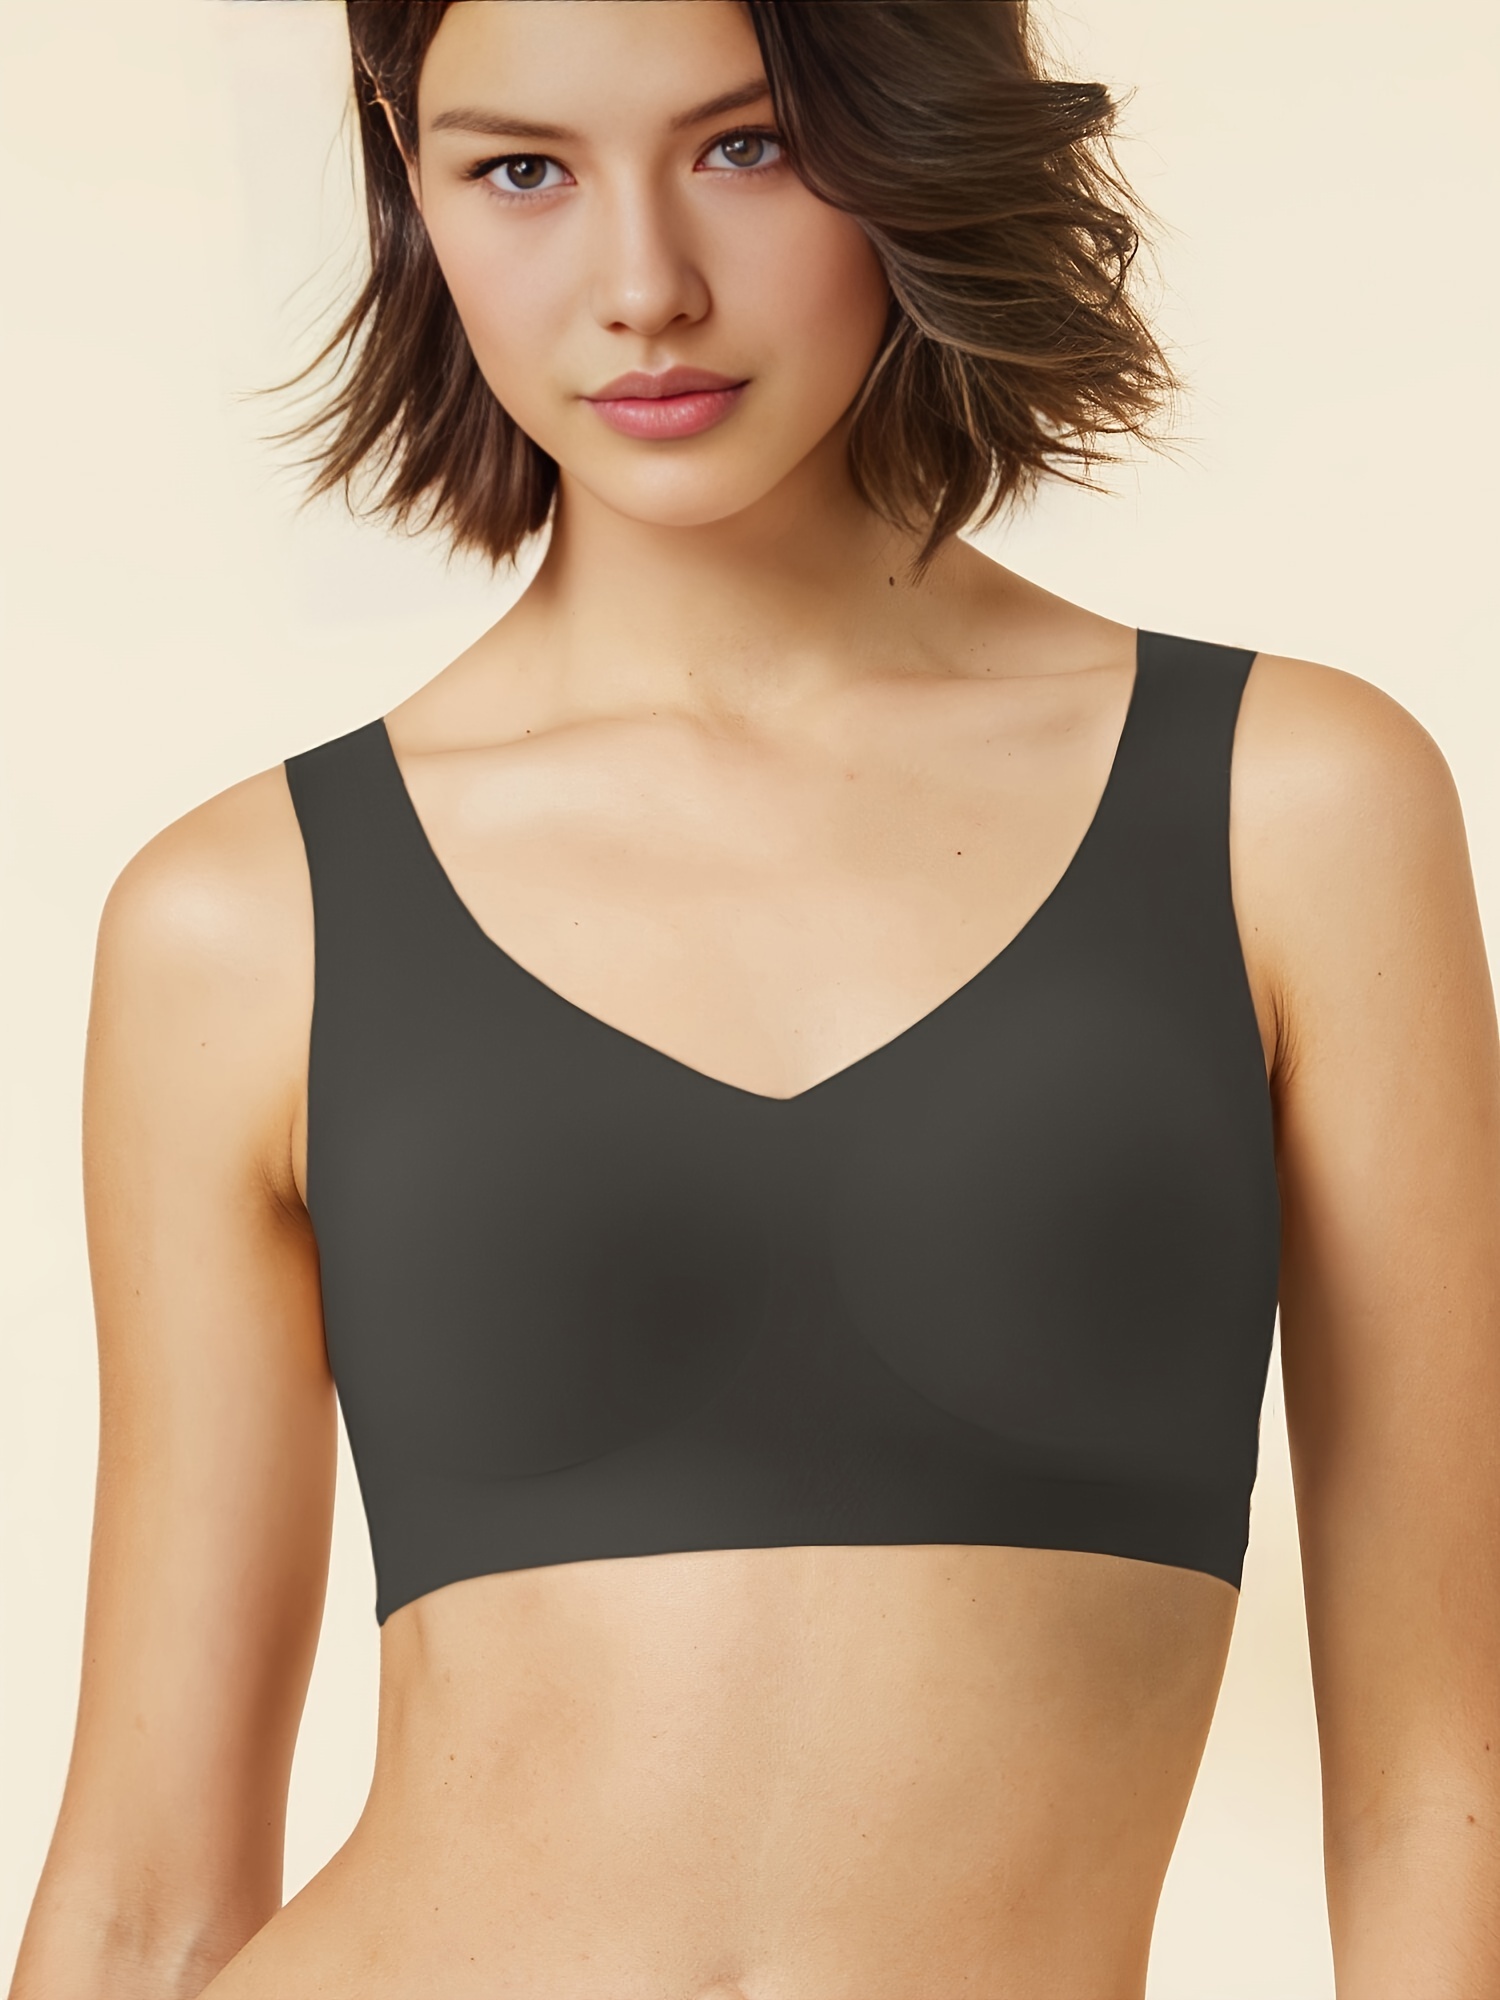 DEAL of the DAY: Seamless Tank Part 2